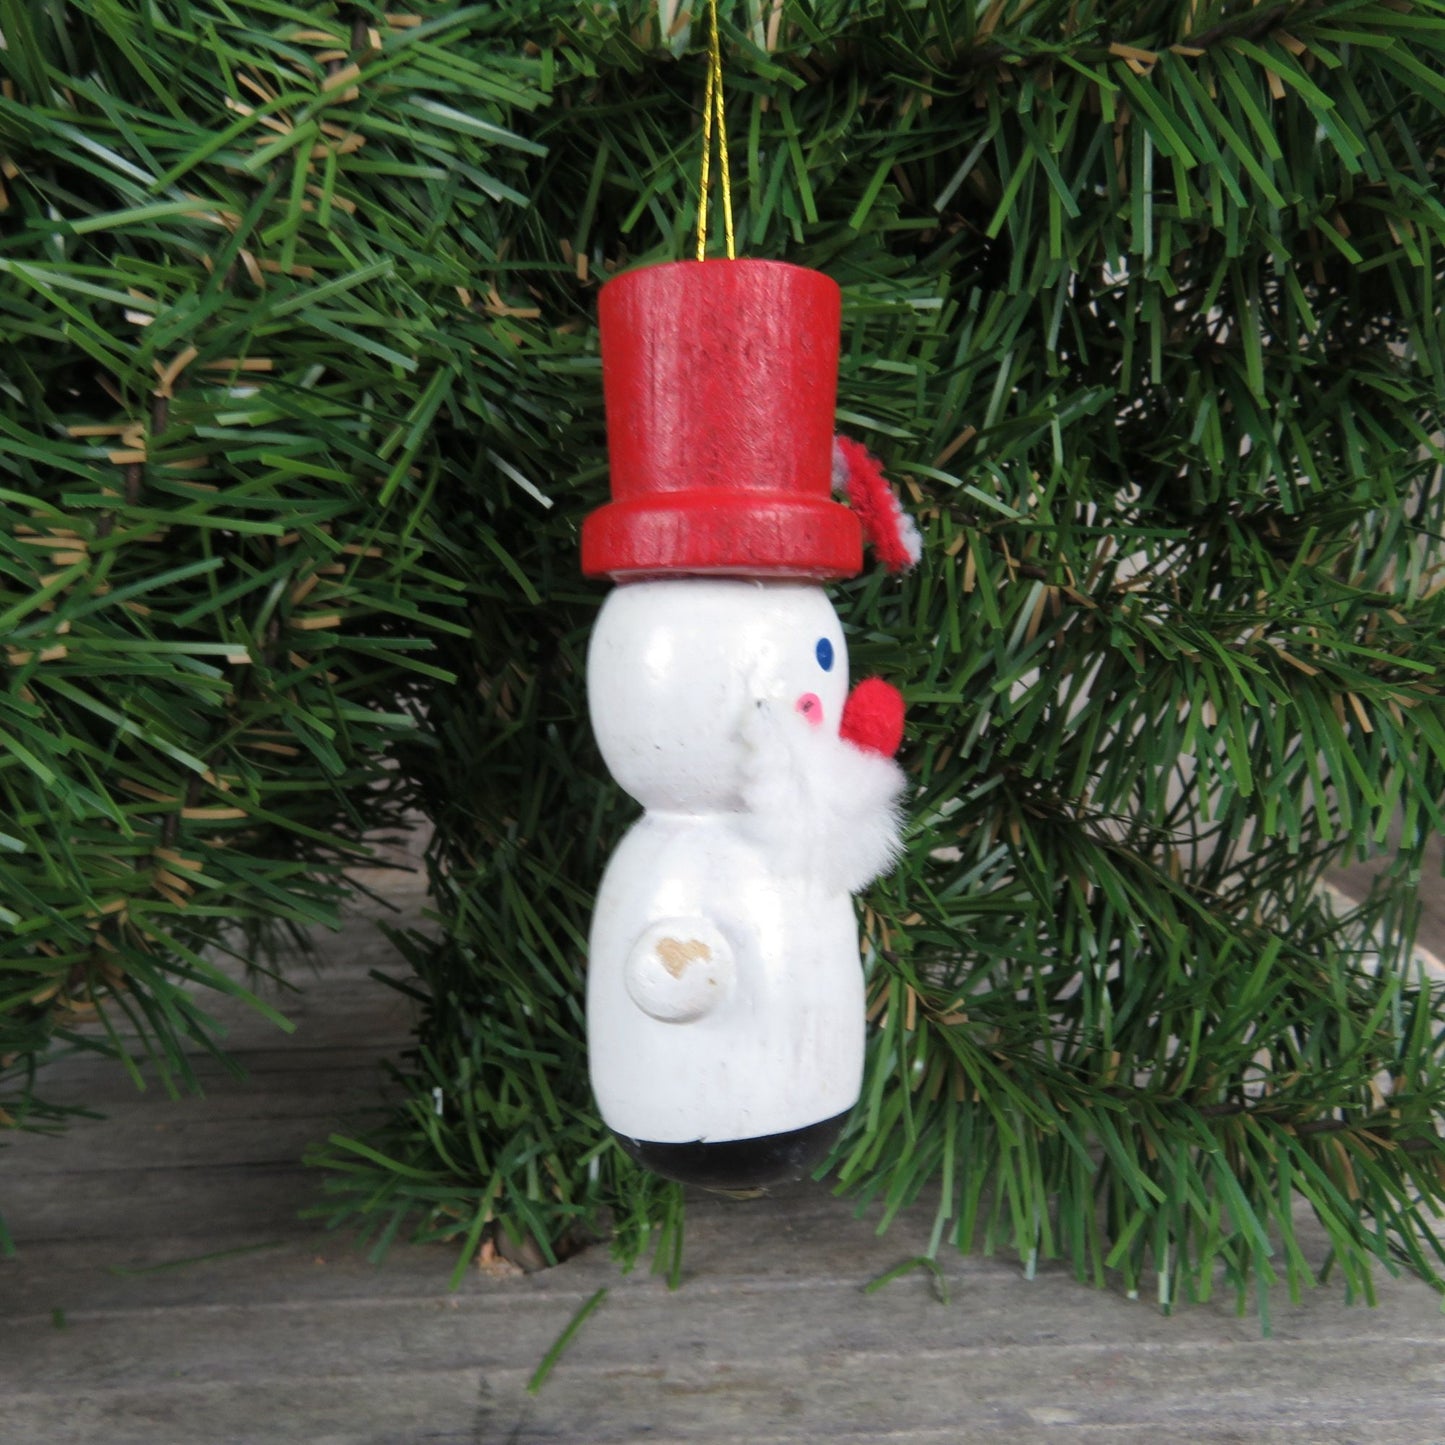 Vintage Wooden Snowman with Red Top Hat Ornament Candy Cane Beard Red Nose Christmas